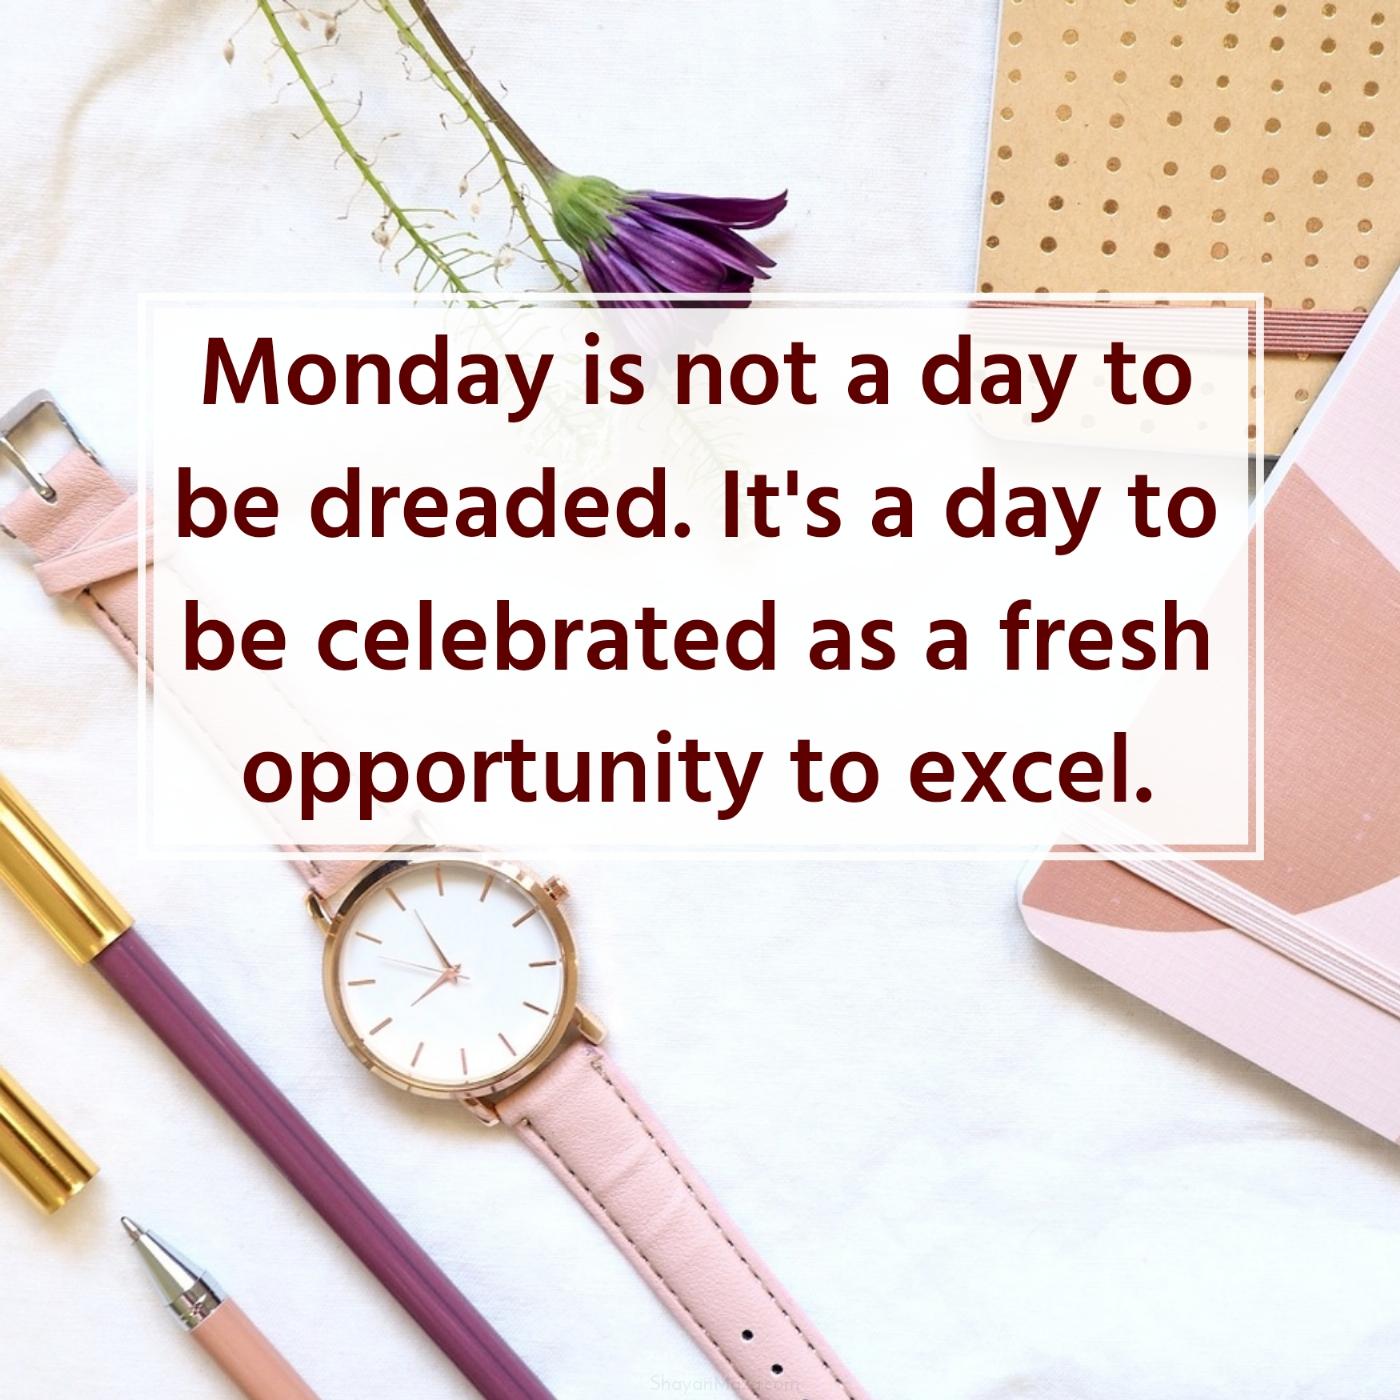 Monday is not a day to be dreaded